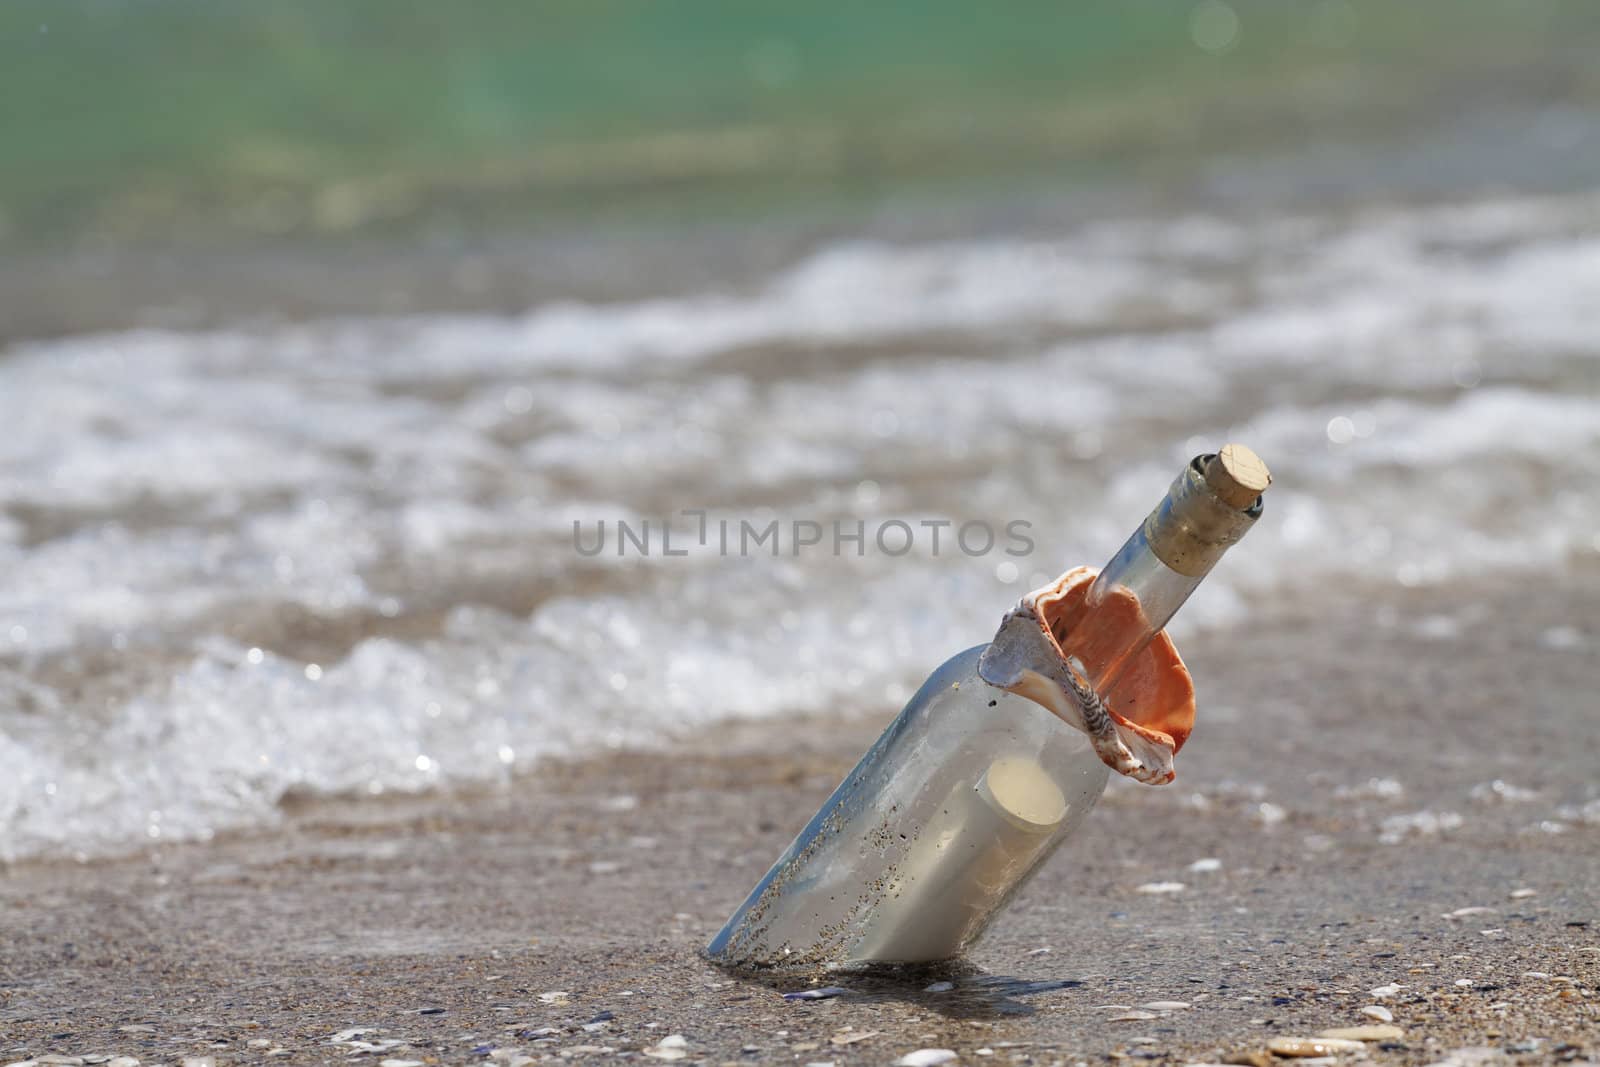 Message in a bottle at the beach by Lamarinx